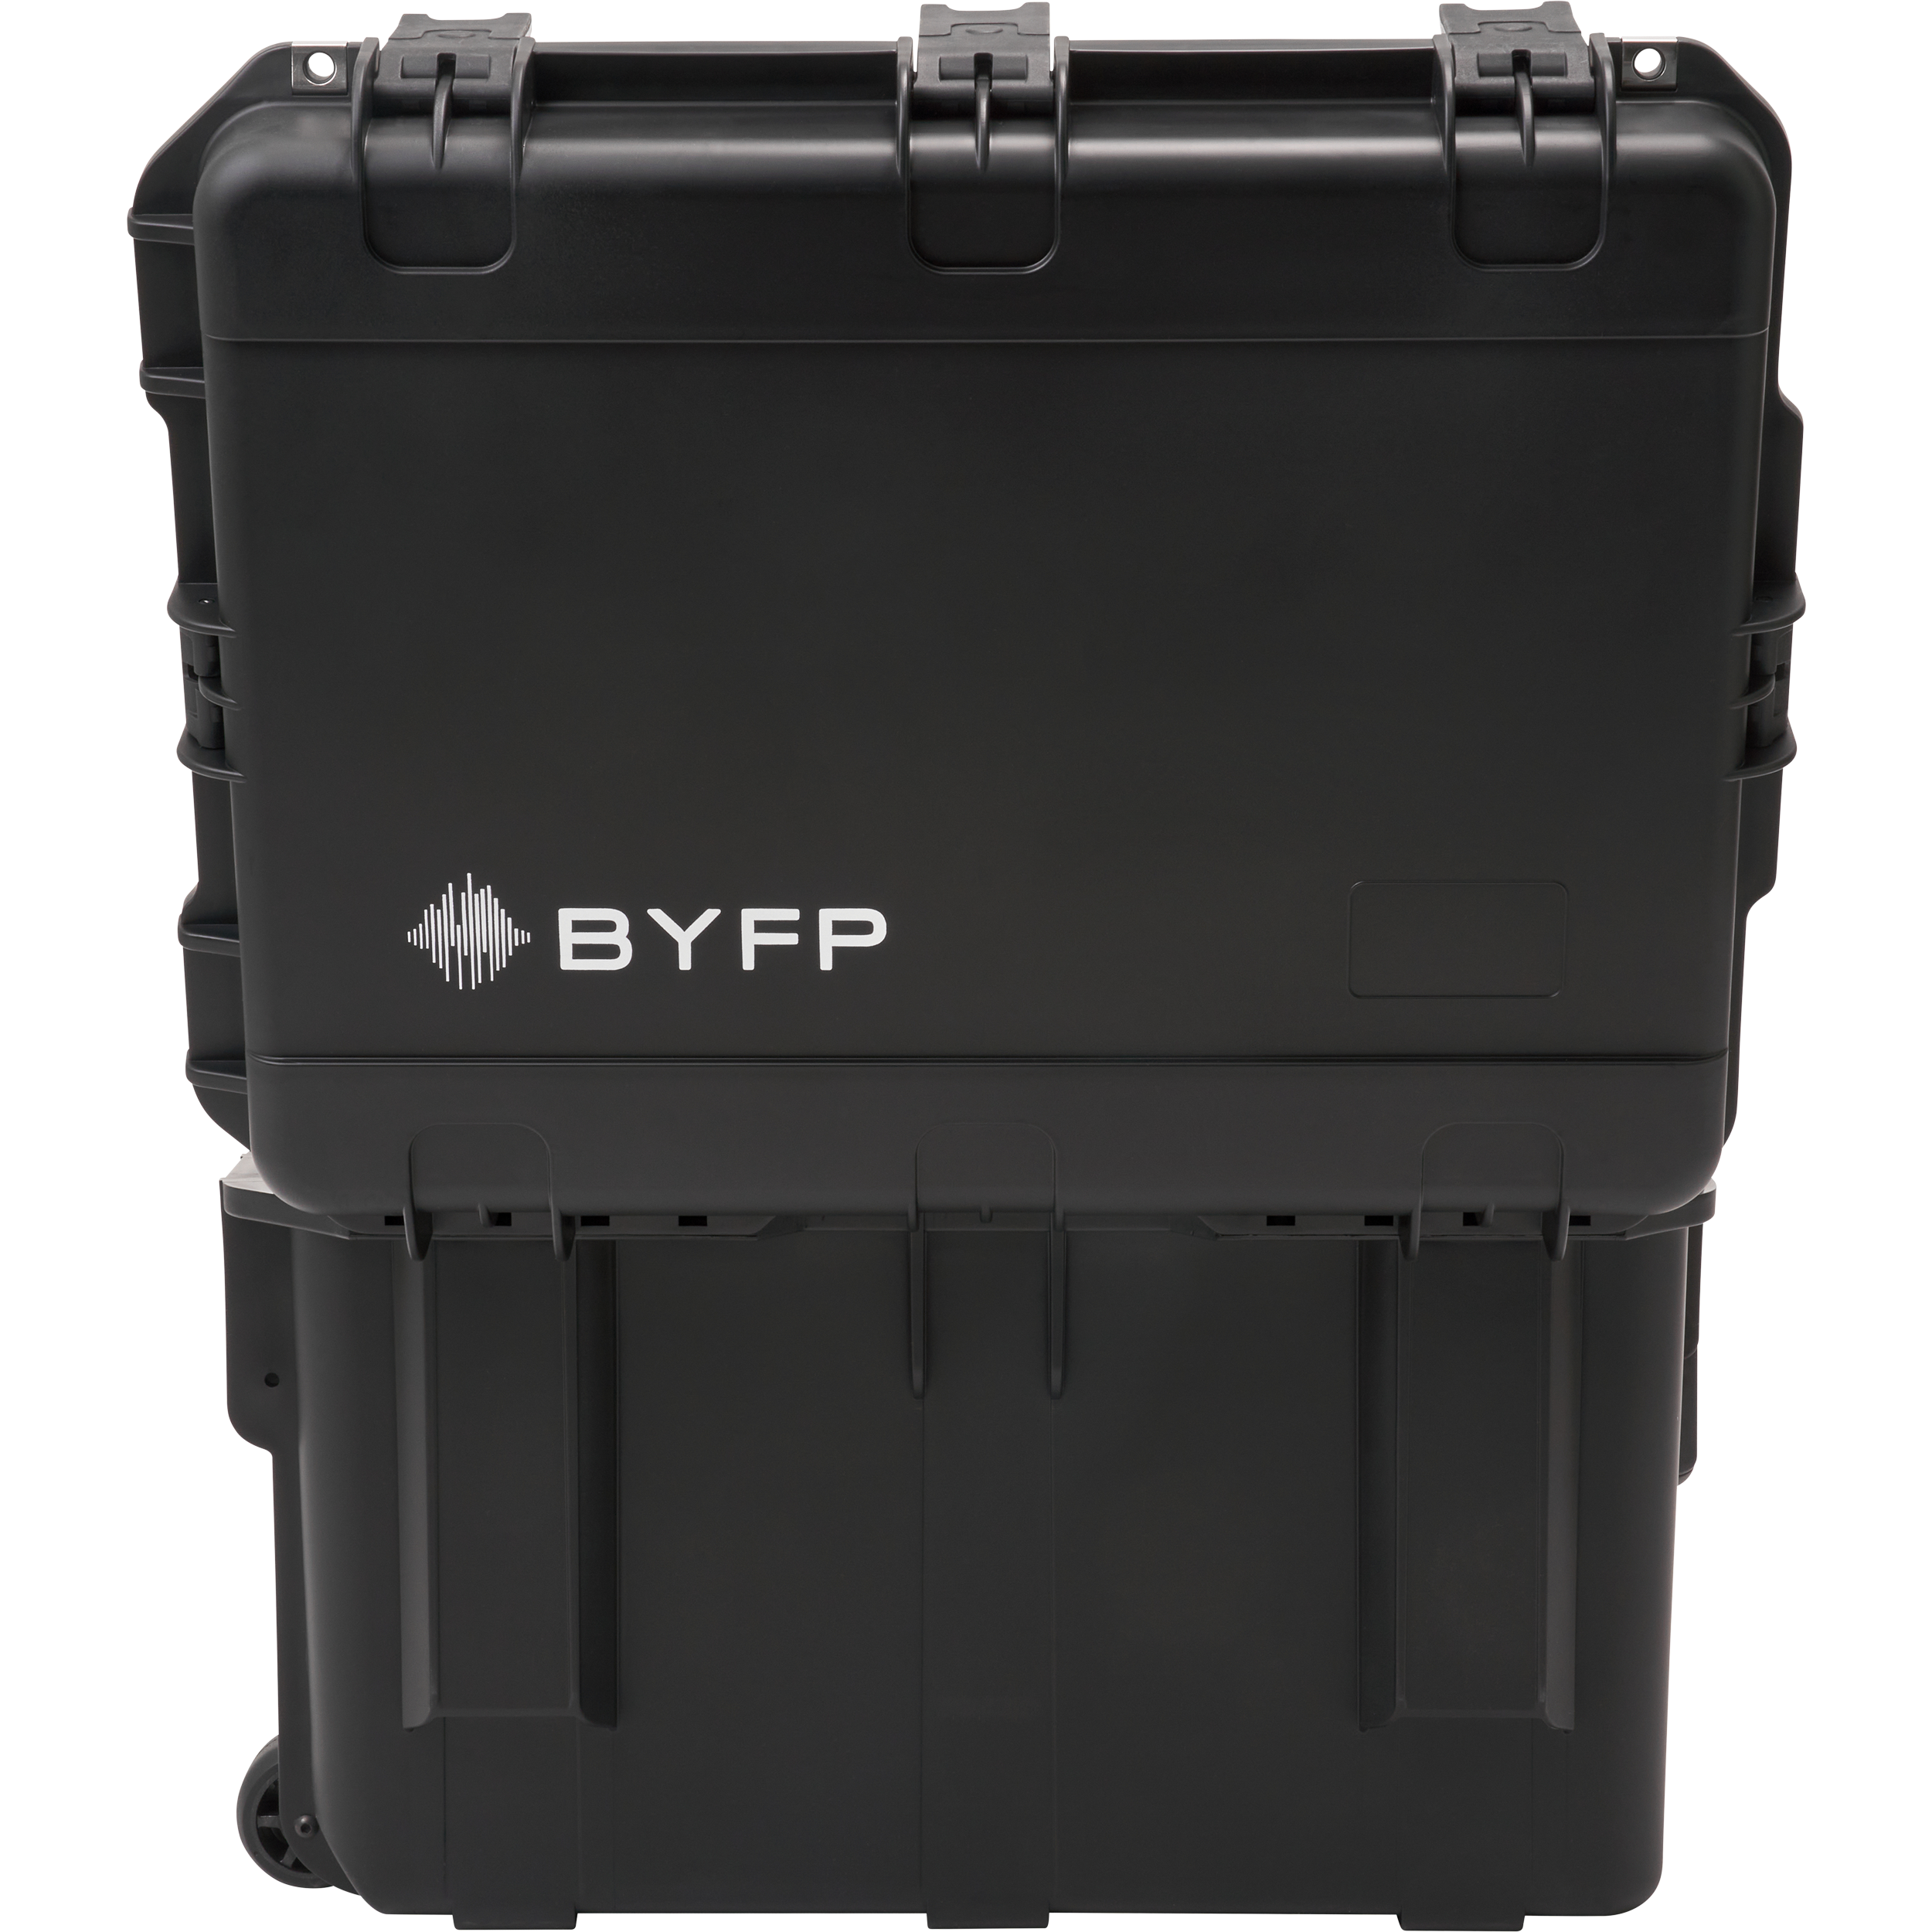 BYFP ipCase for 2x Chauvet Ovation B565